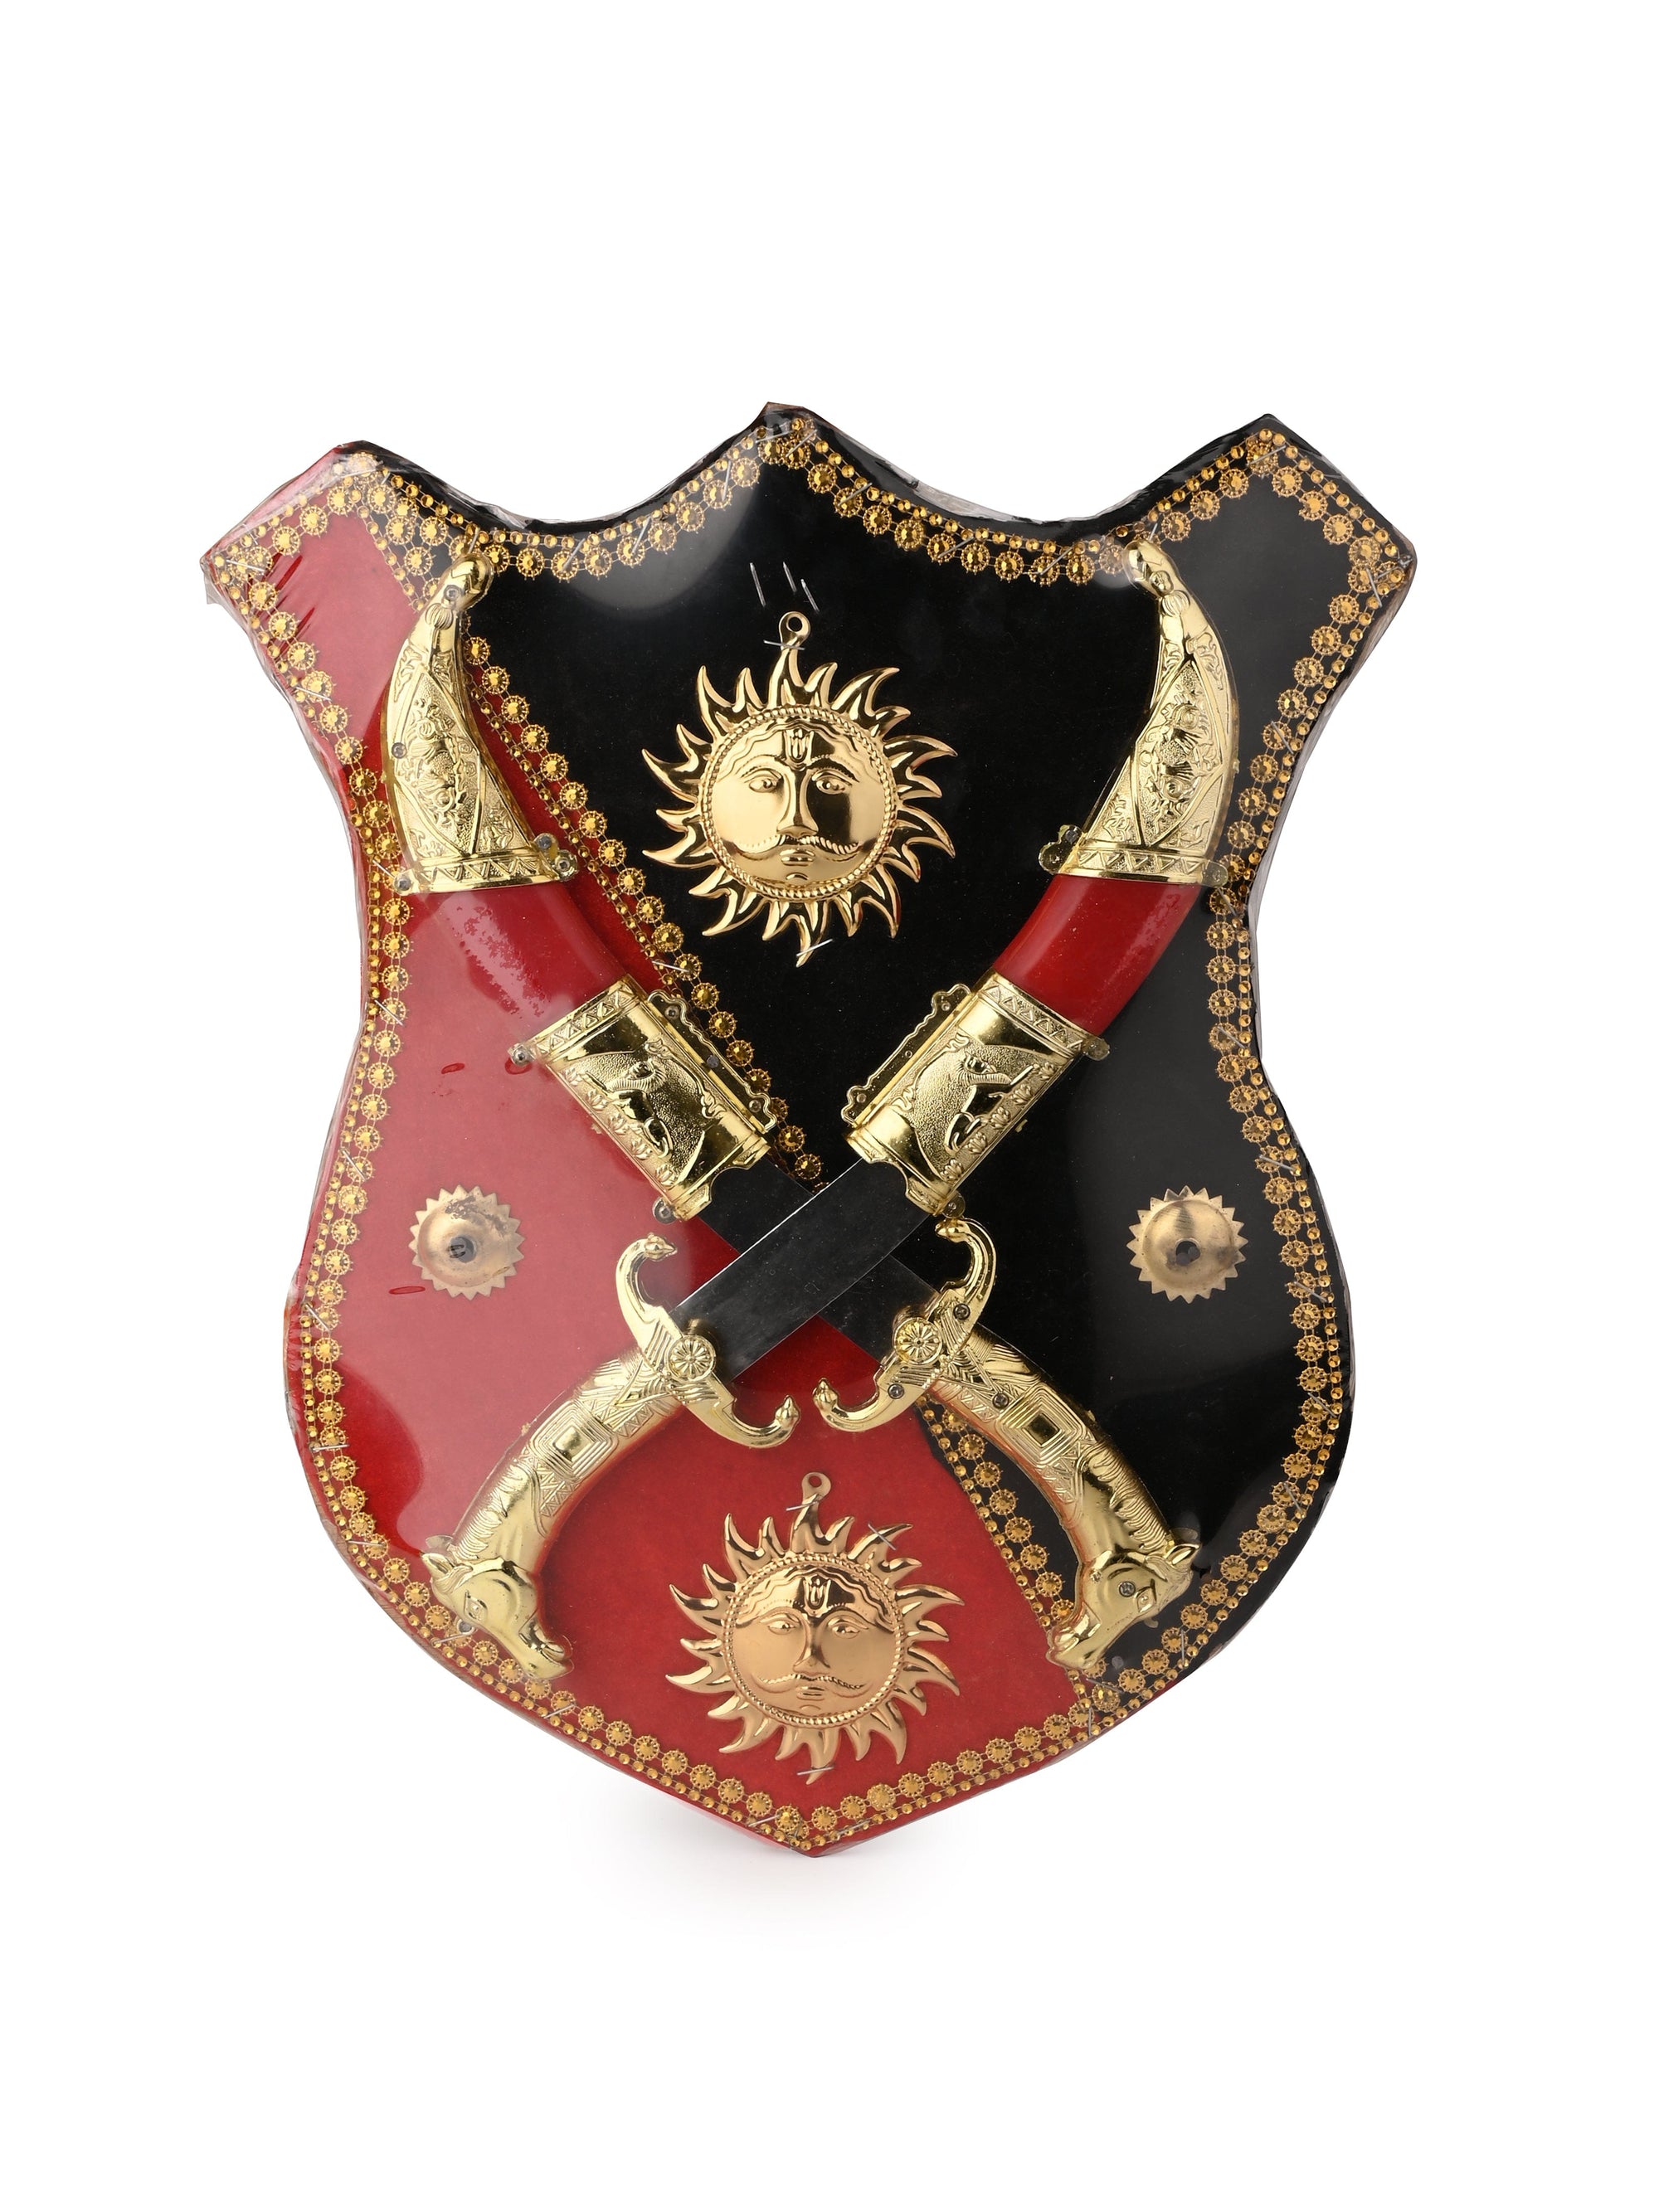 18" Wall Decor Rajput Dhal Talwar / Shield and Knife Set - Red and Black - The Heritage Artifacts